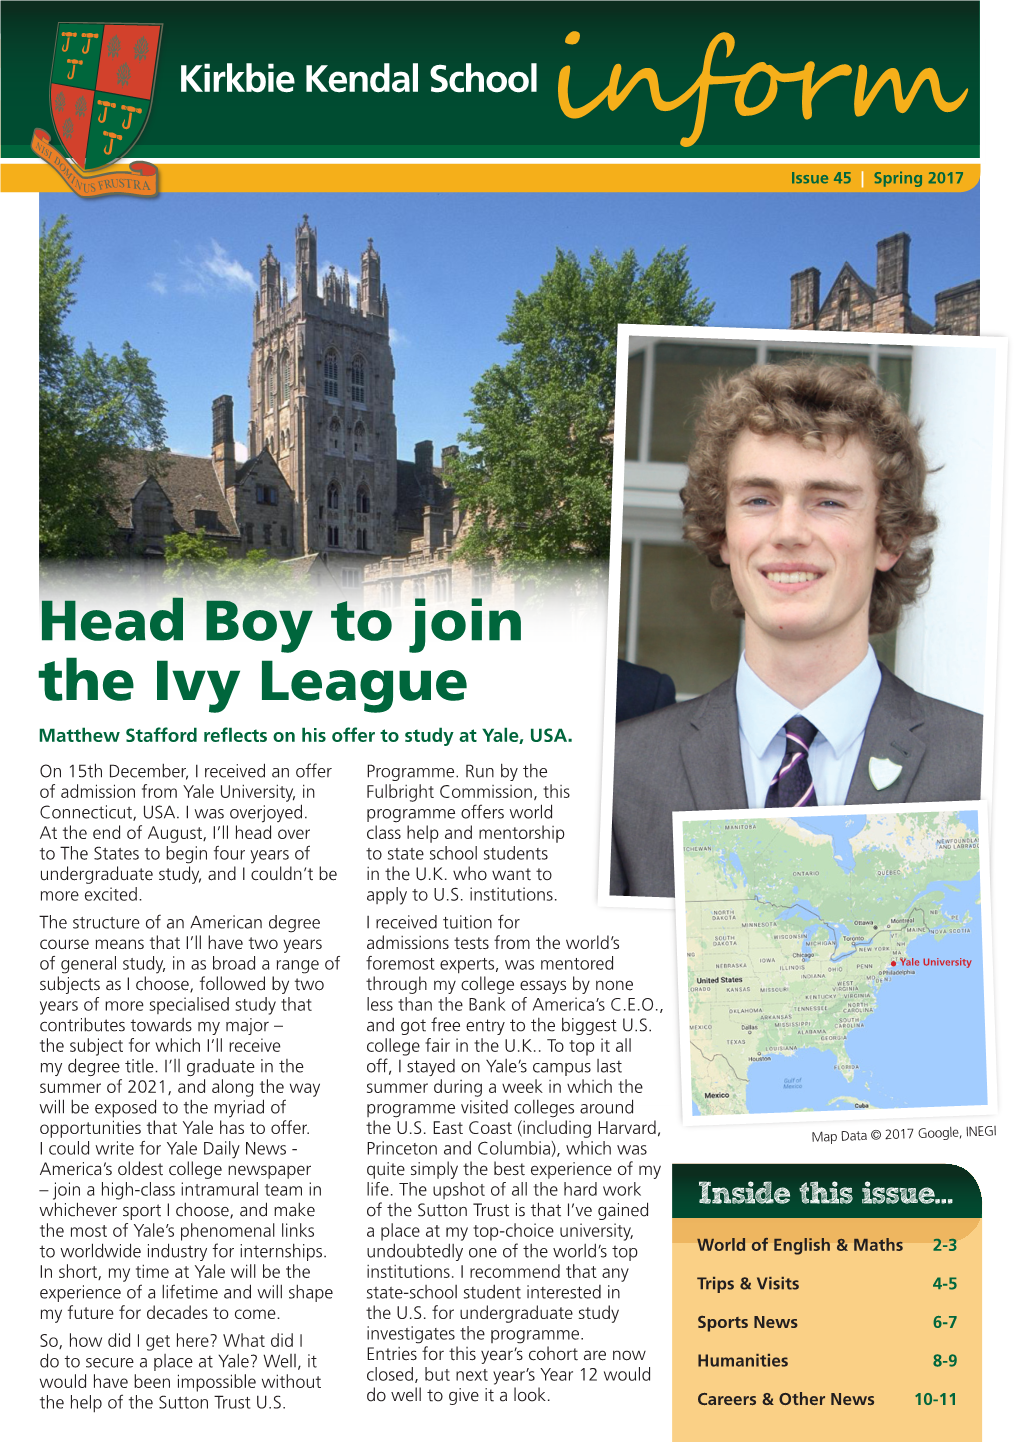 Head Boy to Join the Ivy League Matthew Stafford Reflects on His Offer to Study at Yale, USA